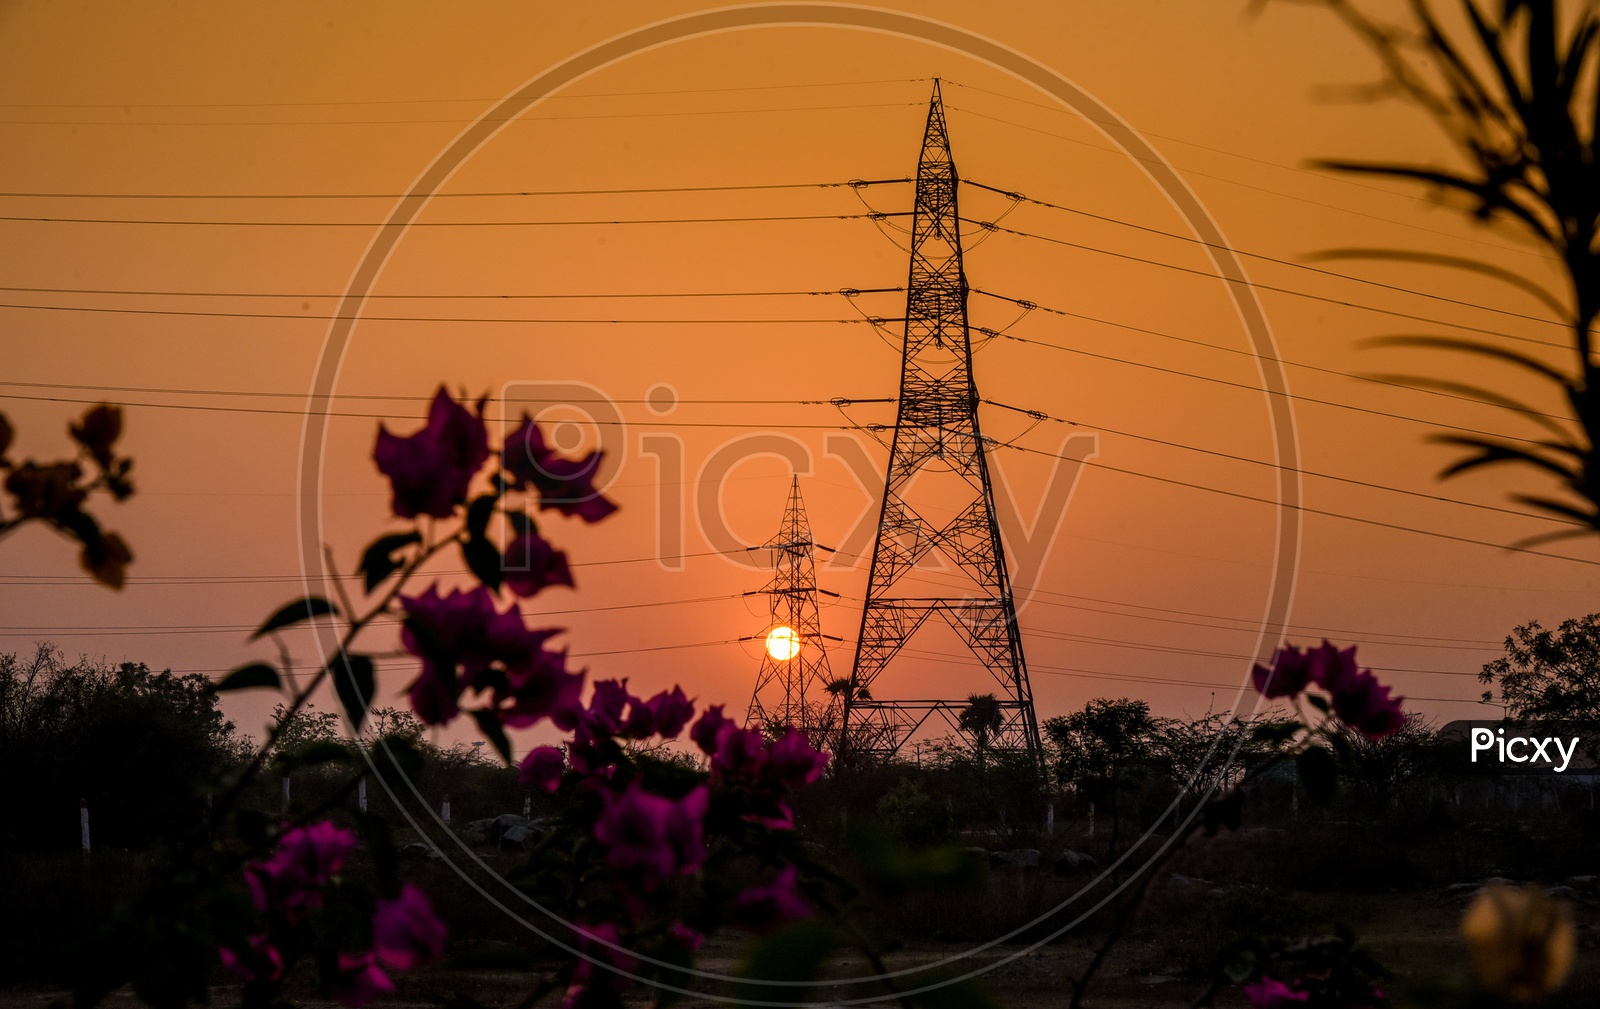 Power Lines at Sunrise